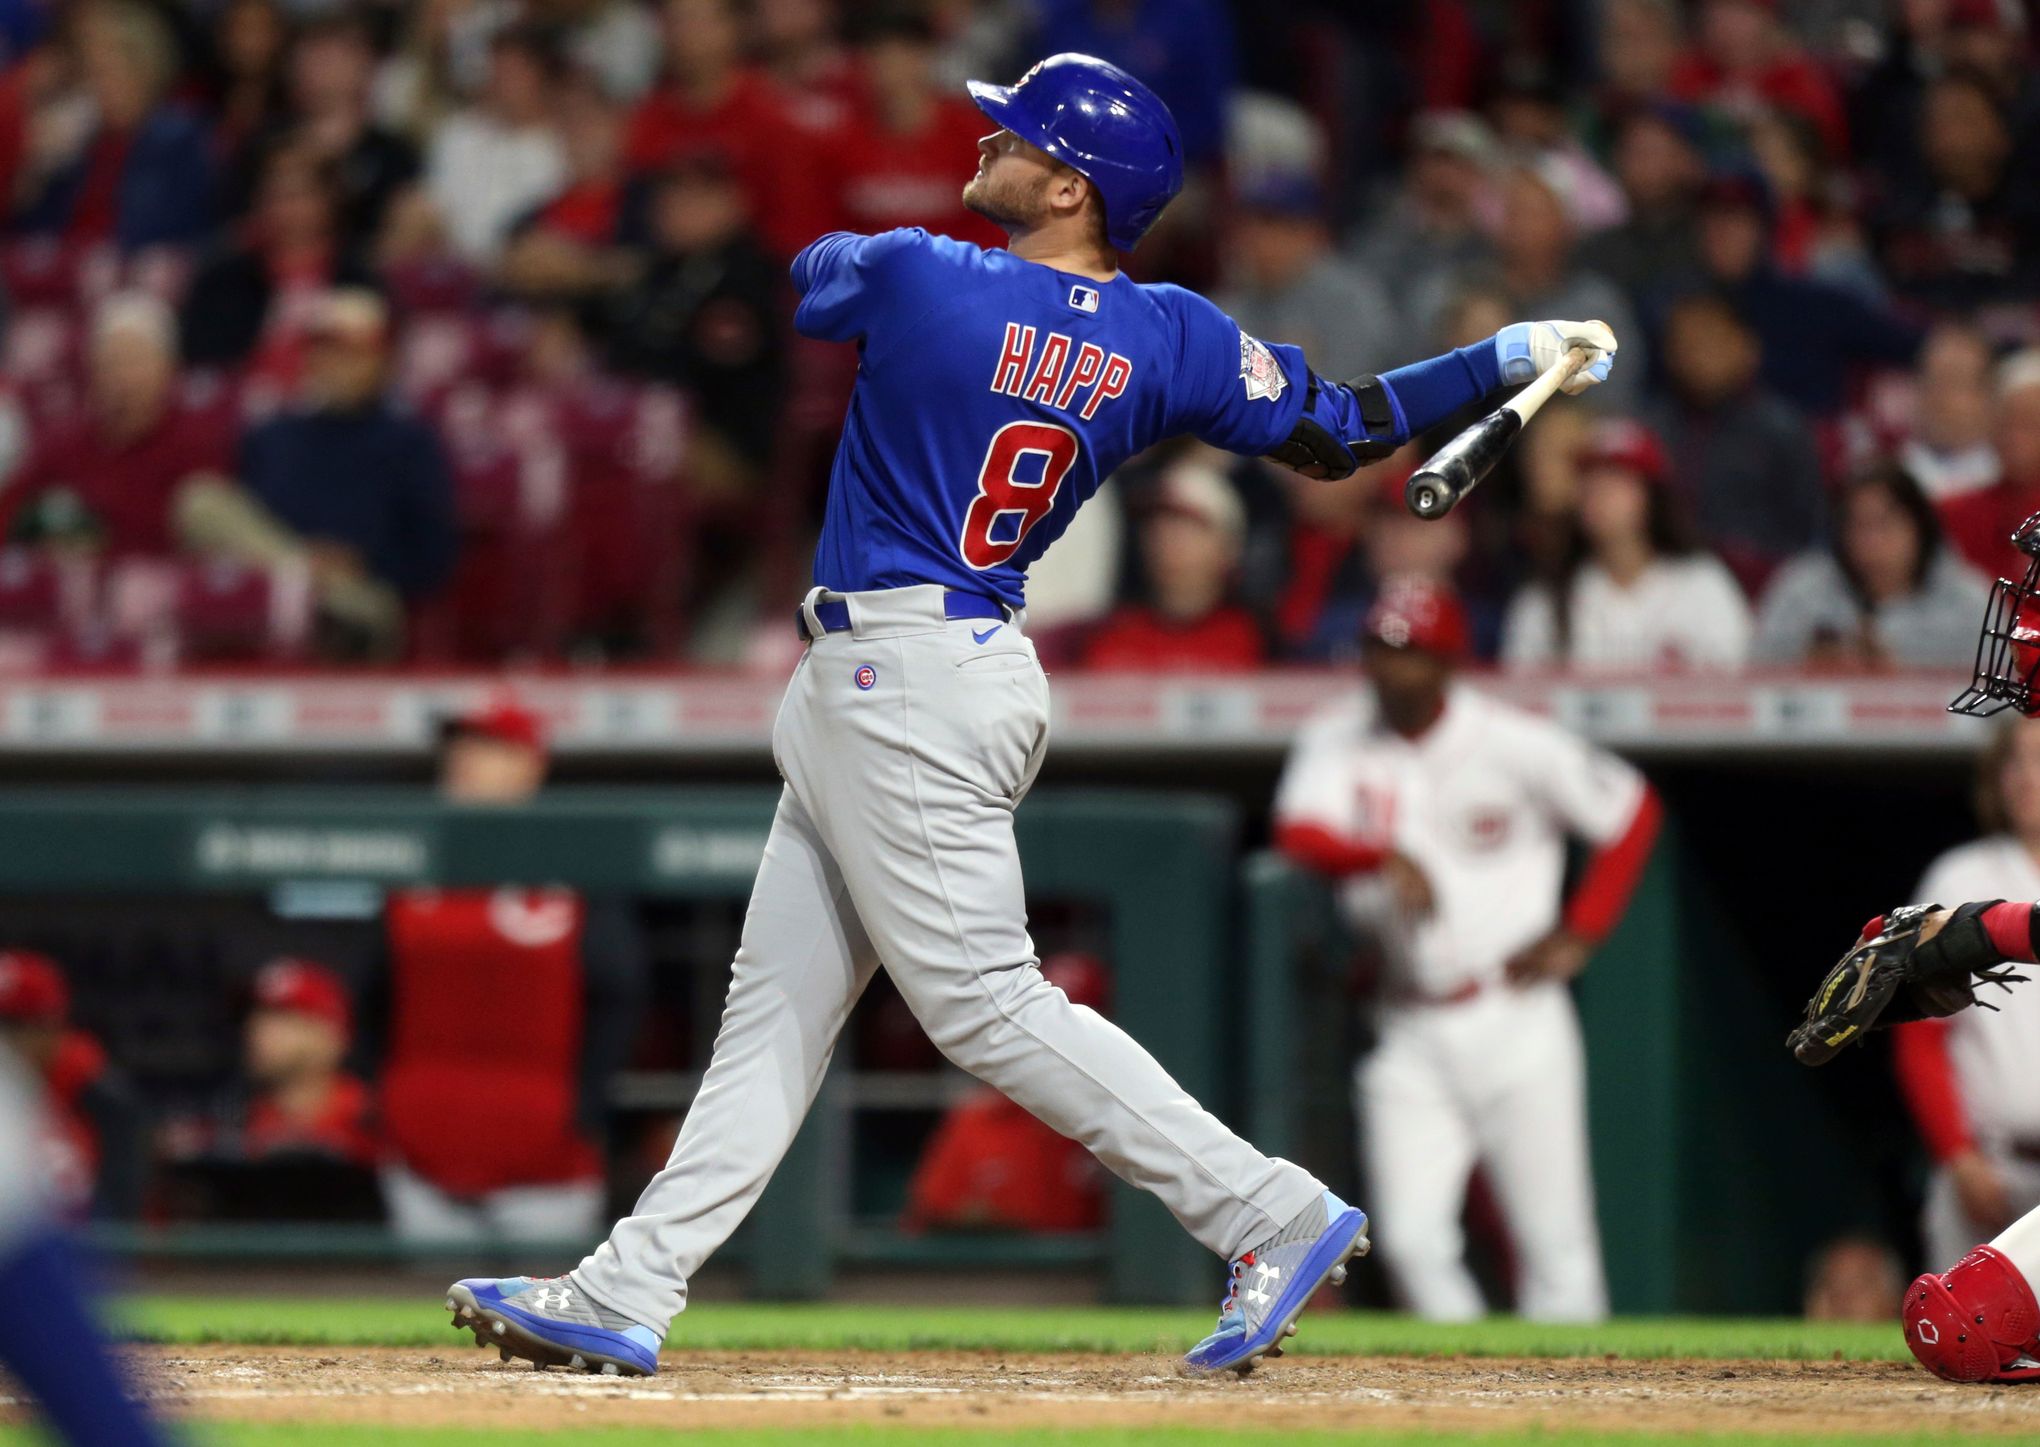 Cubs' David Ross on Yan Gomes: His year has been spectacular